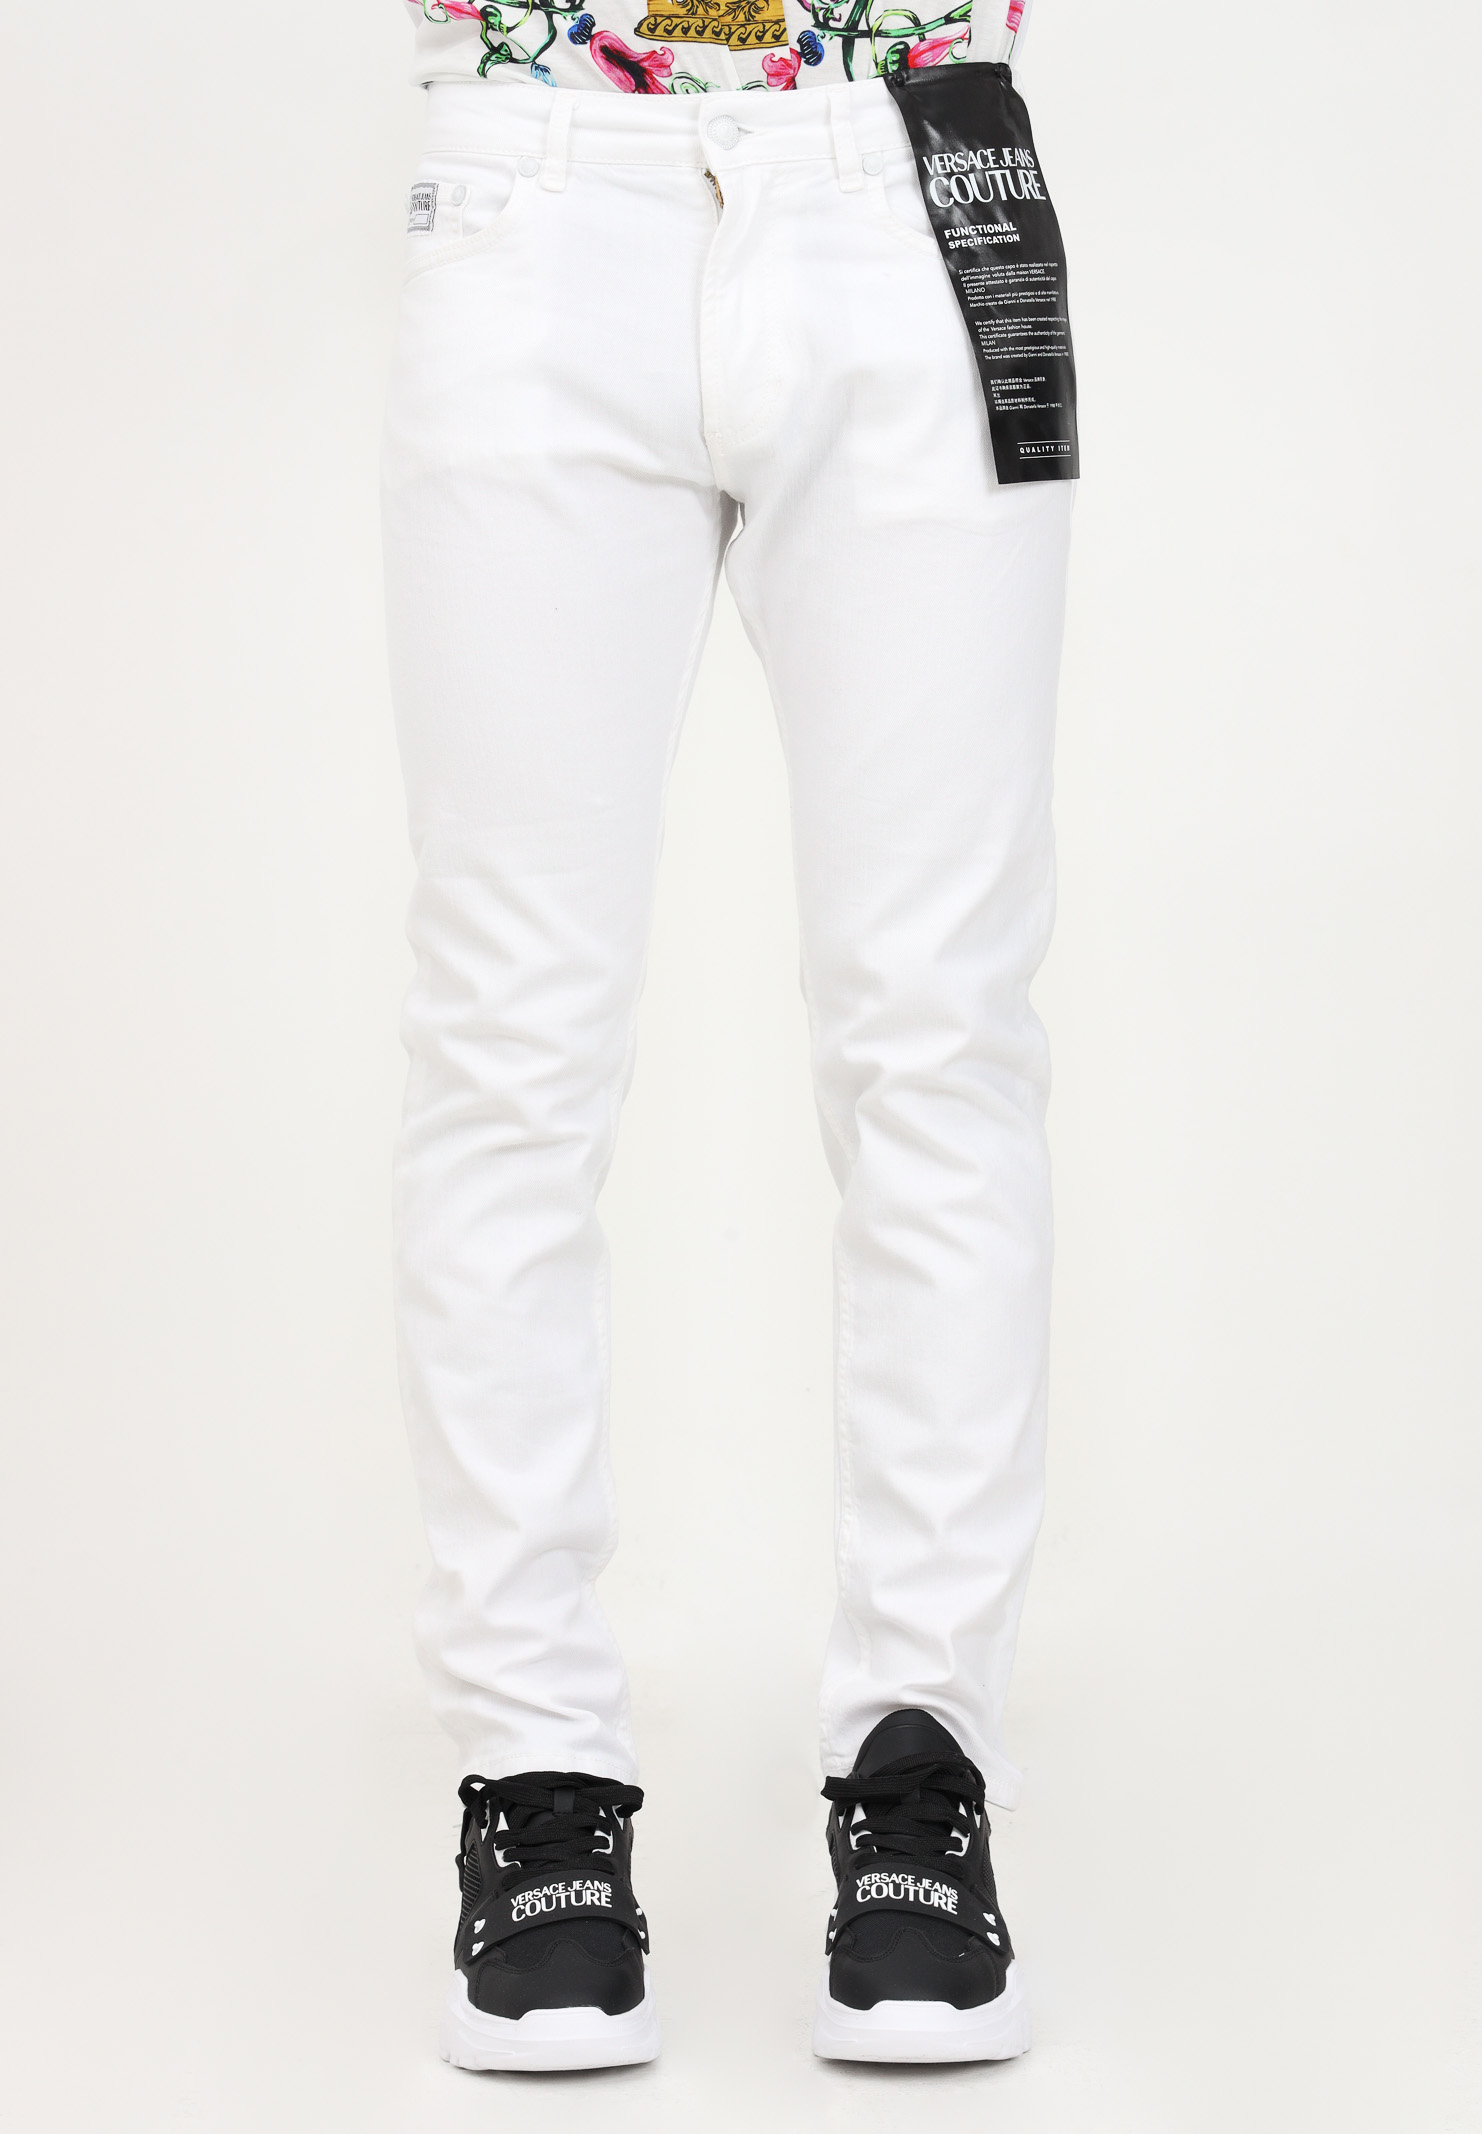 verbrand afbetalen Heiligdom Men's white denim jeans with logo patch on the back - VERSACE JEANS COUTURE  - Pavidas